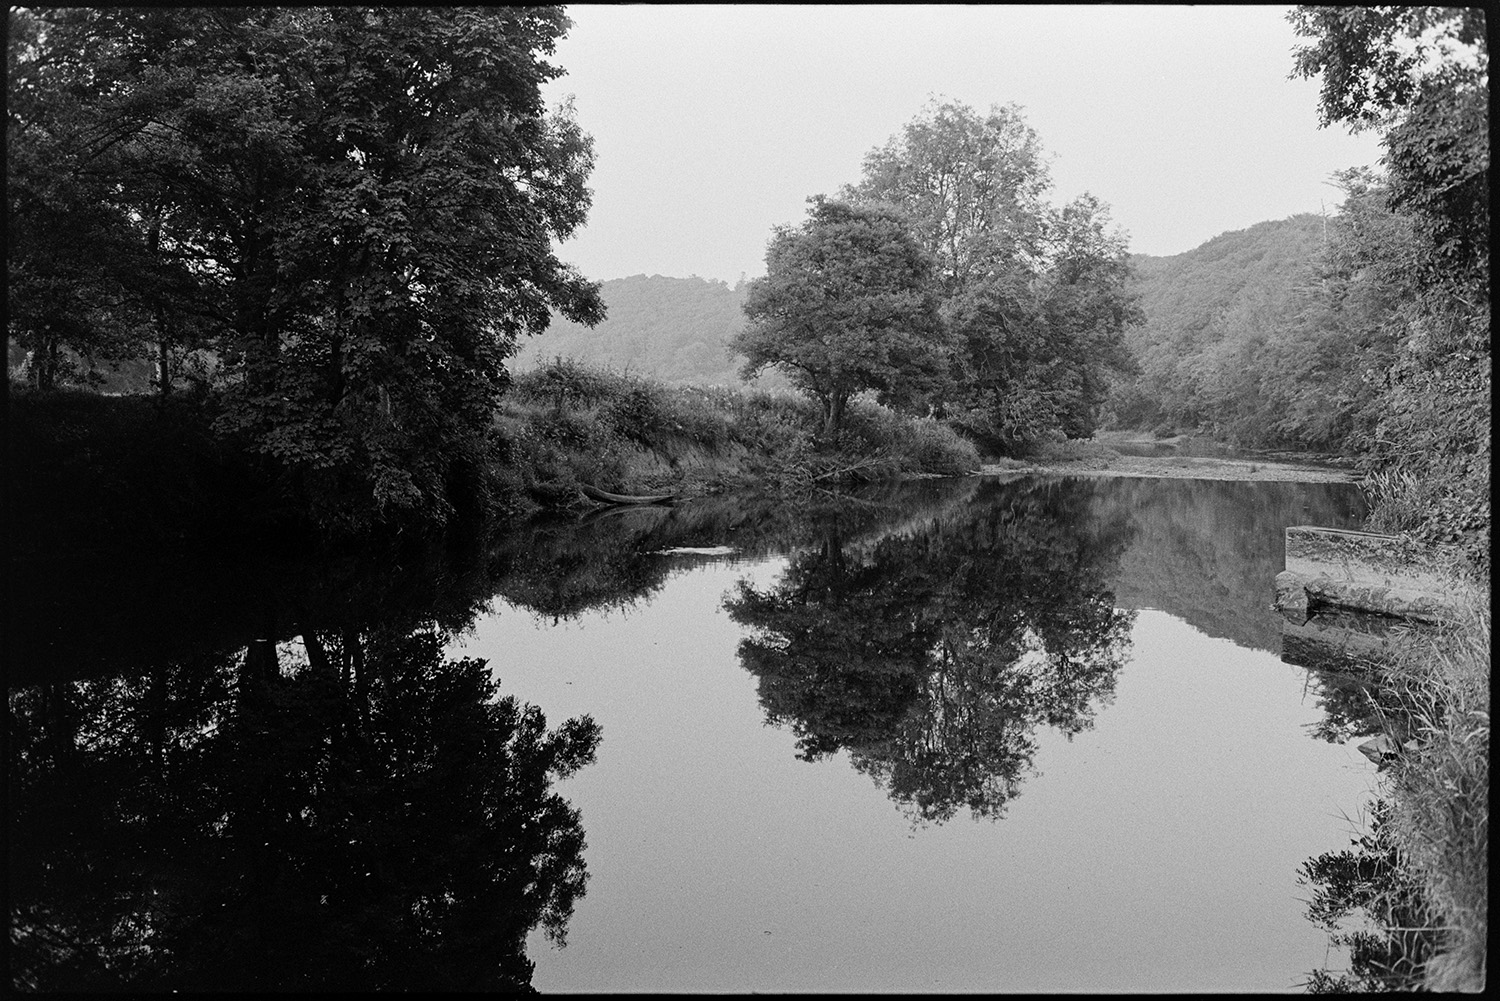 Still river, reflected trees. 
[The River Torridge running past woodland at Halsdon, Dolton. Trees on the riverbank are reflected in the water.]